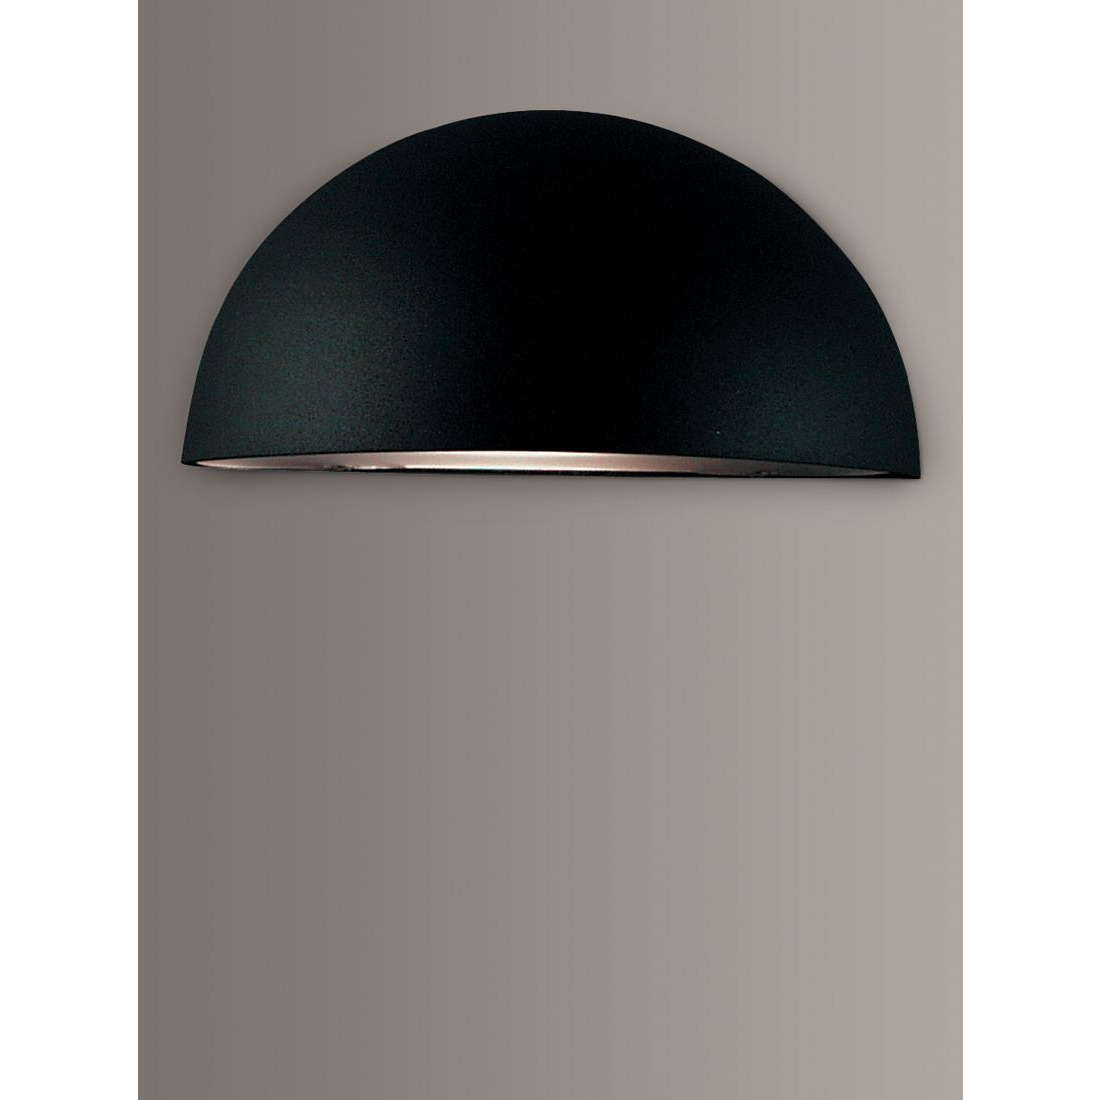 Nordlux Scorpius Outdoor Wall Light - image 1